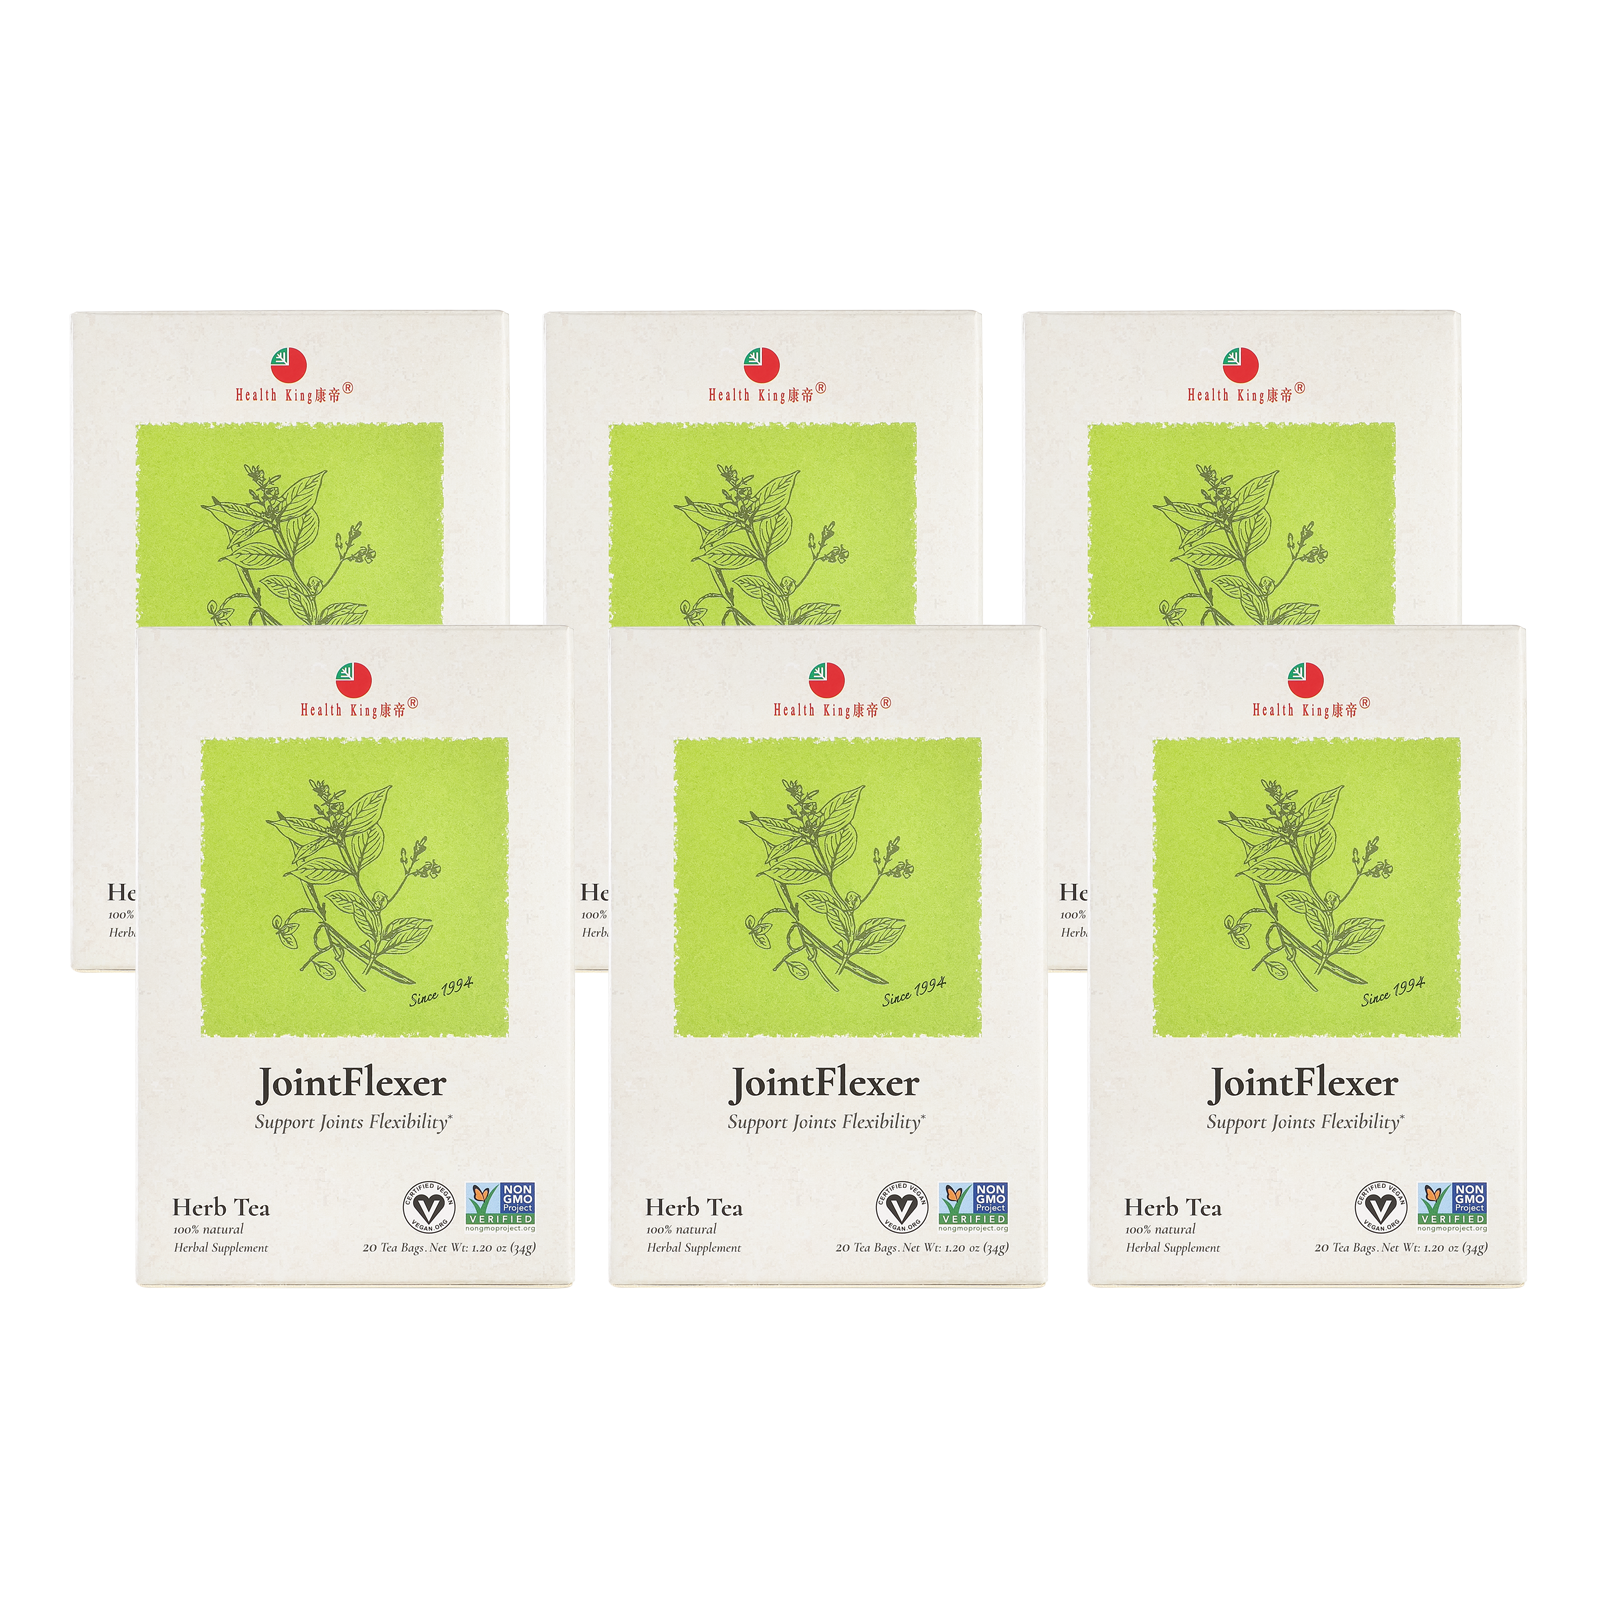 Six boxes of JointFlexer Herb Tea designed to enhance joint flexibility